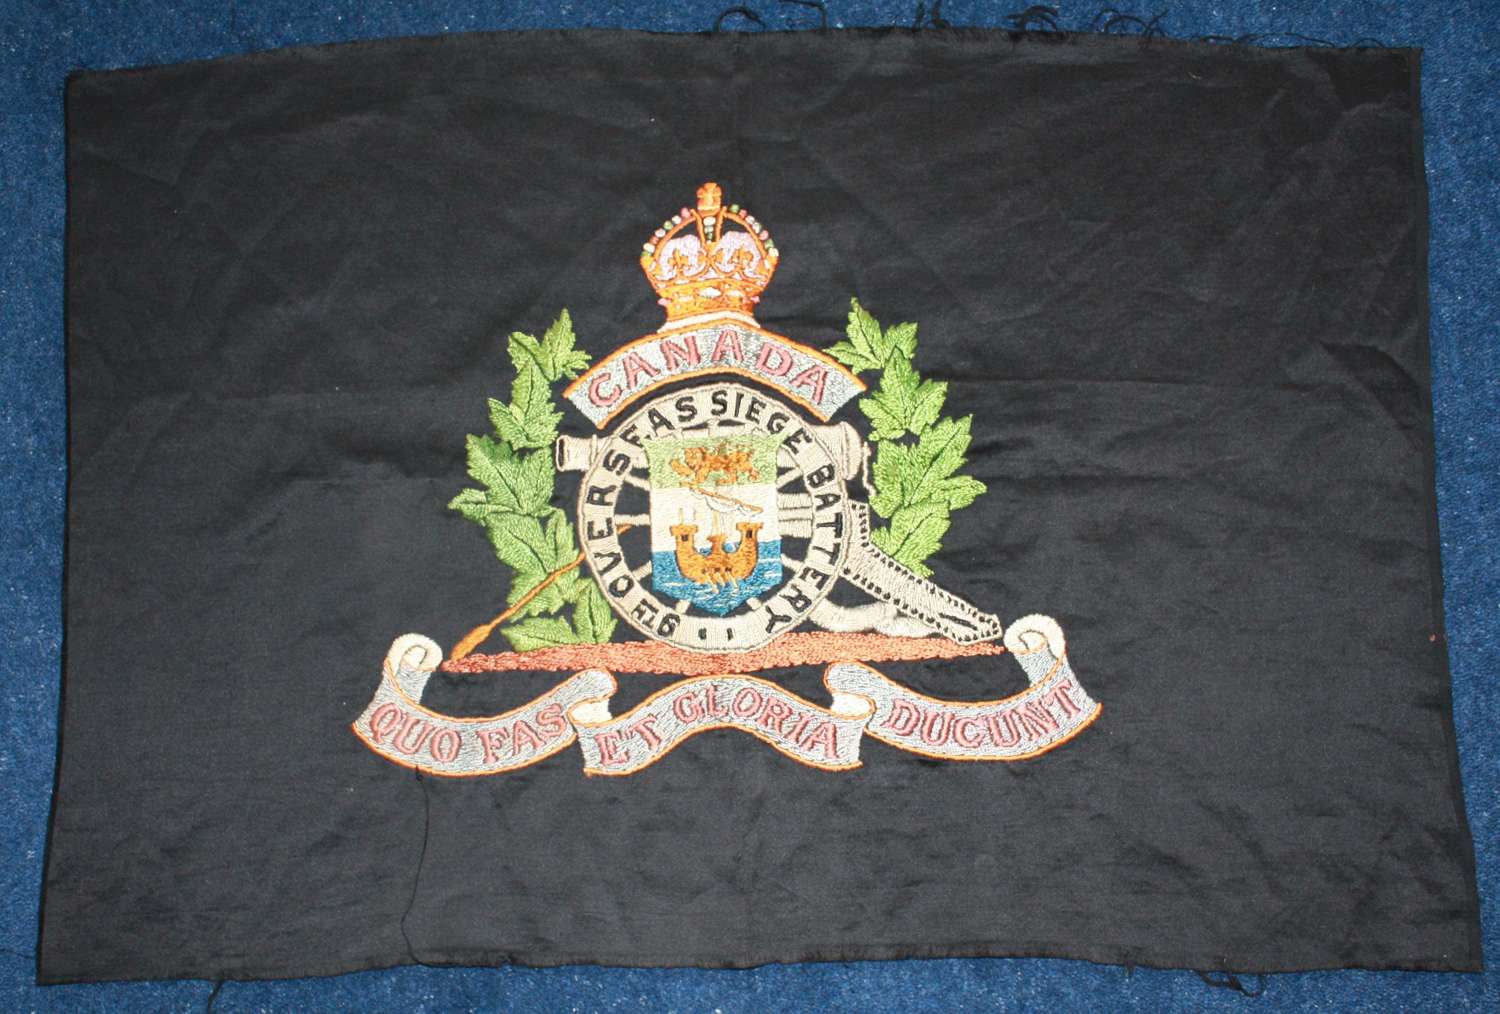 LARGE EMBROIDERED WW1 BADGE OF THE CANADIAN ARTILLERY